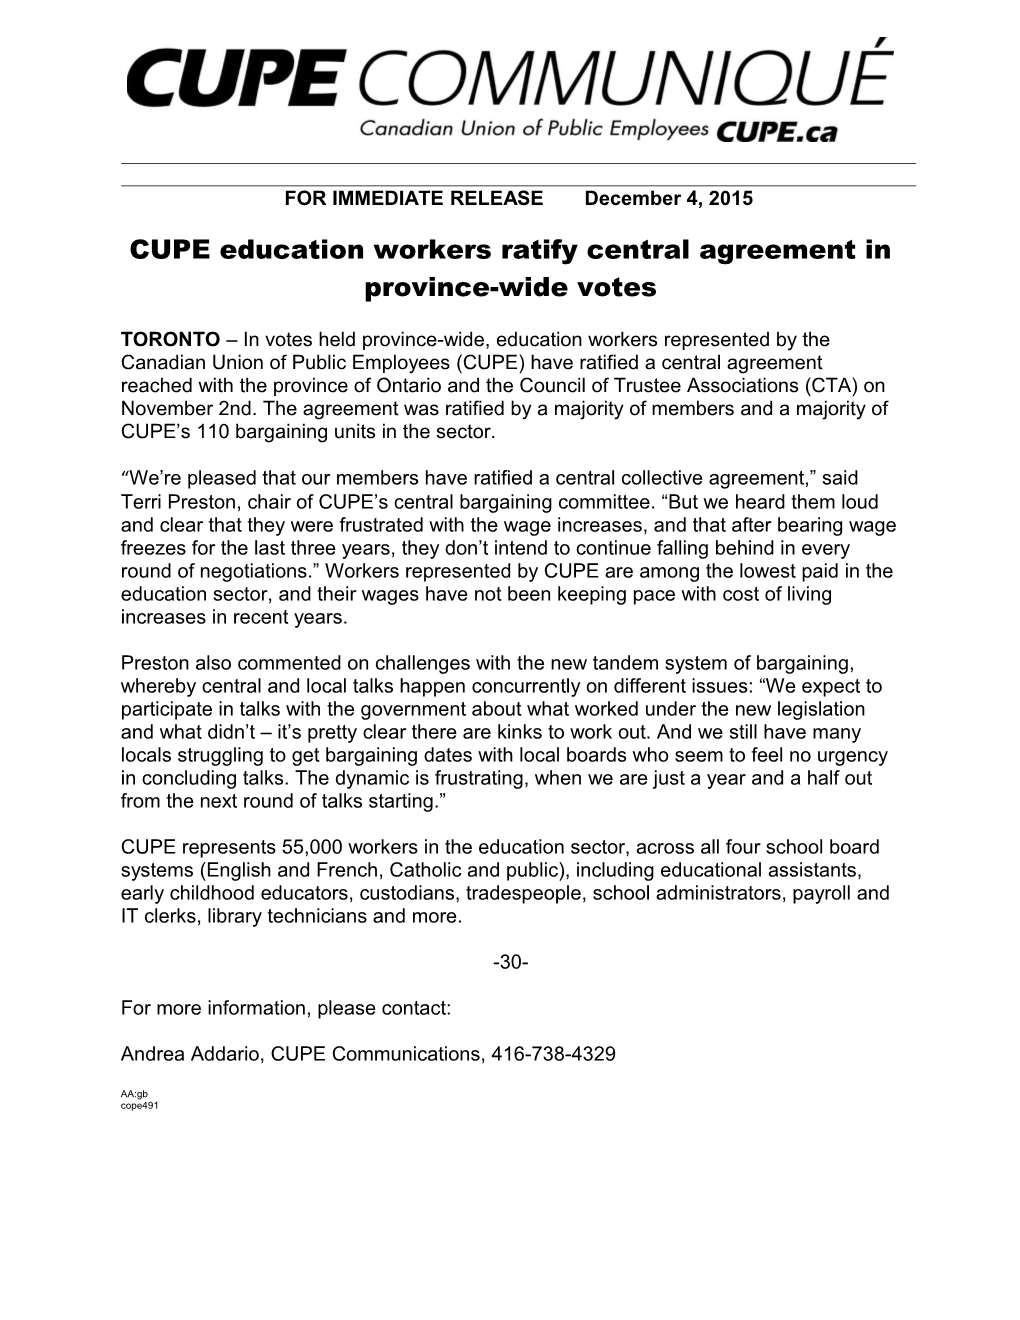 CUPE Education Workers Ratify Central Agreement in Province-Wide Votes